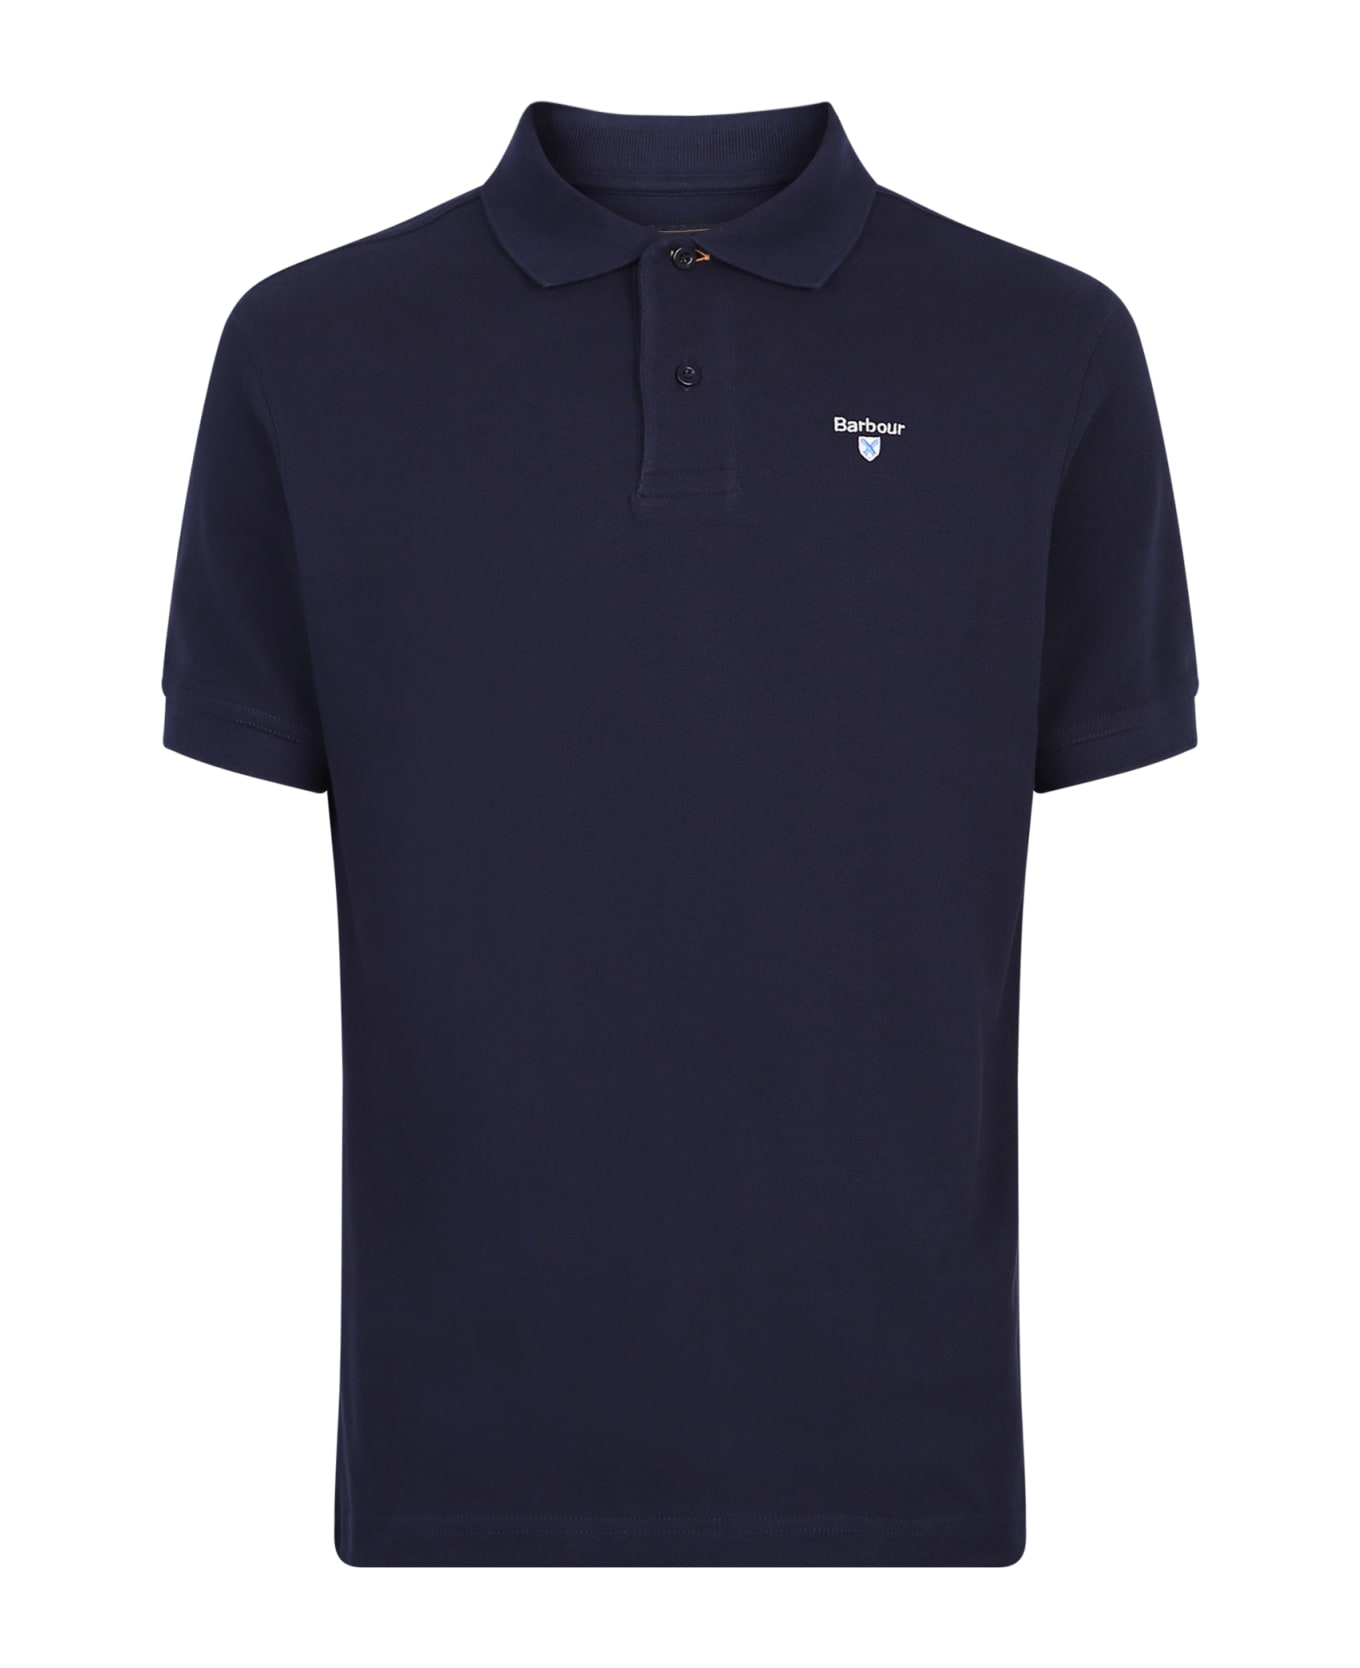 Barbour Branded Polo - Blue